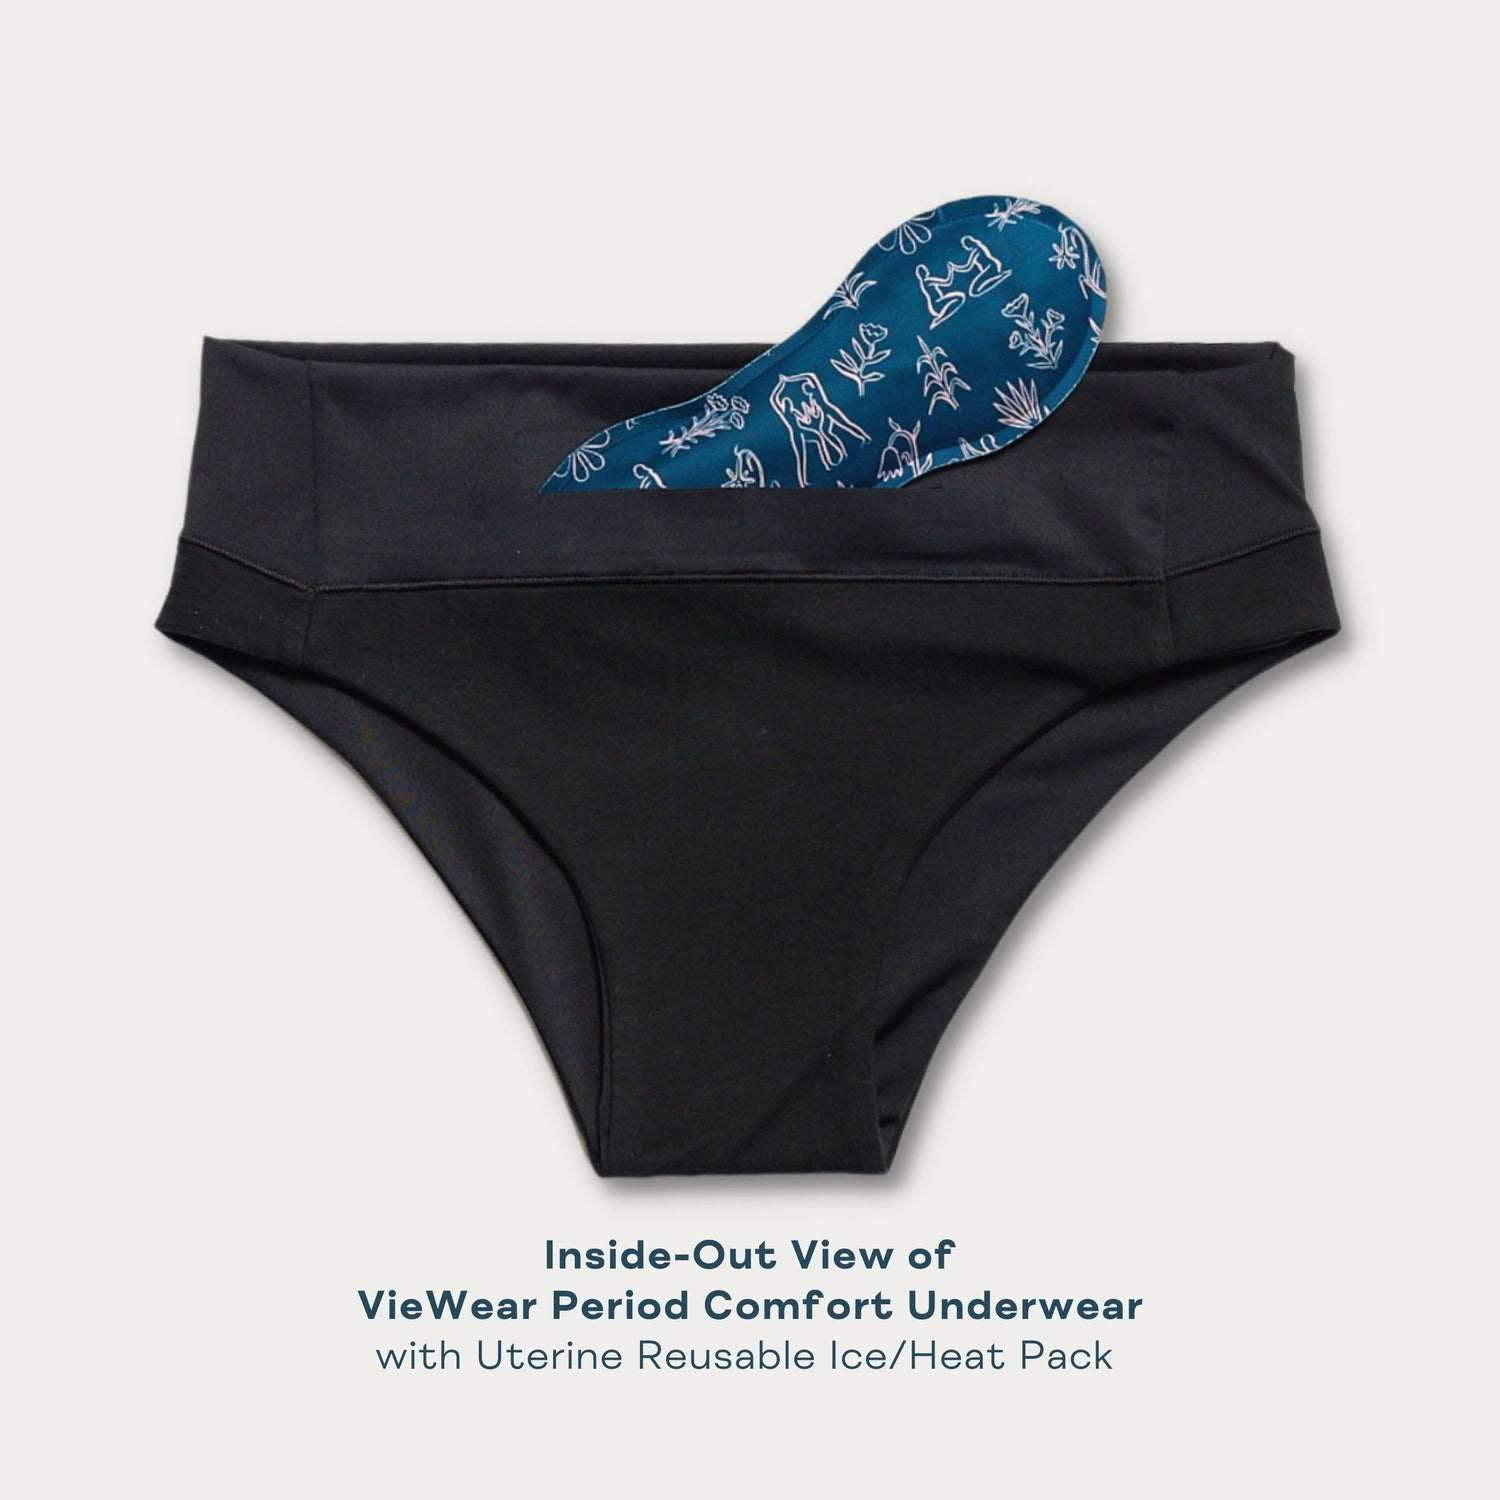 Inside-out view of VieWear Period Comfort Underwear